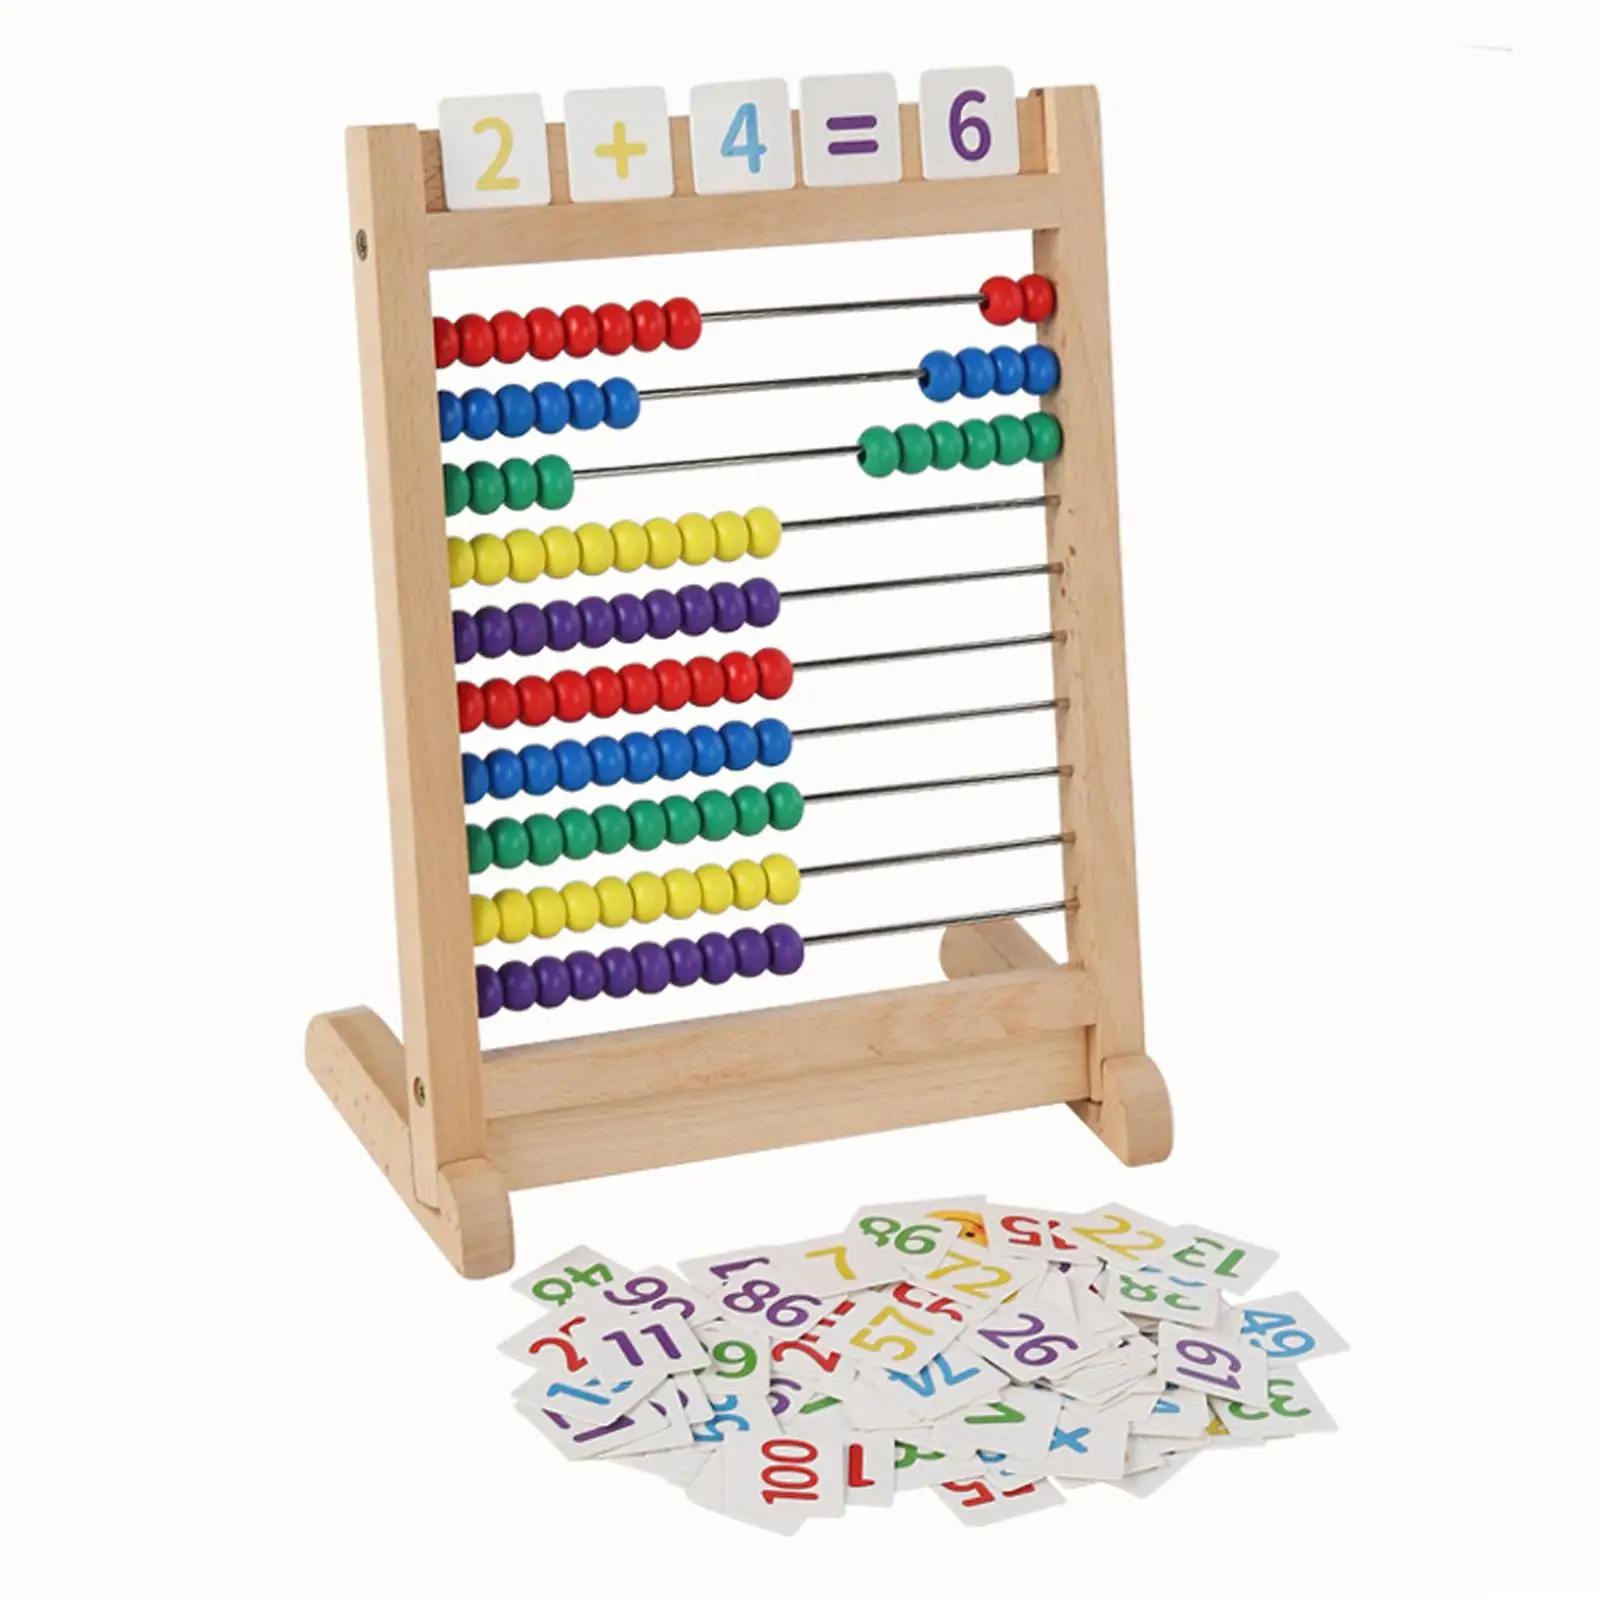 Wooden Abacus Bead Arithmetic Abacus Educational Counting Frames Toy Math Manipulatives for Elementary Interactive Toys